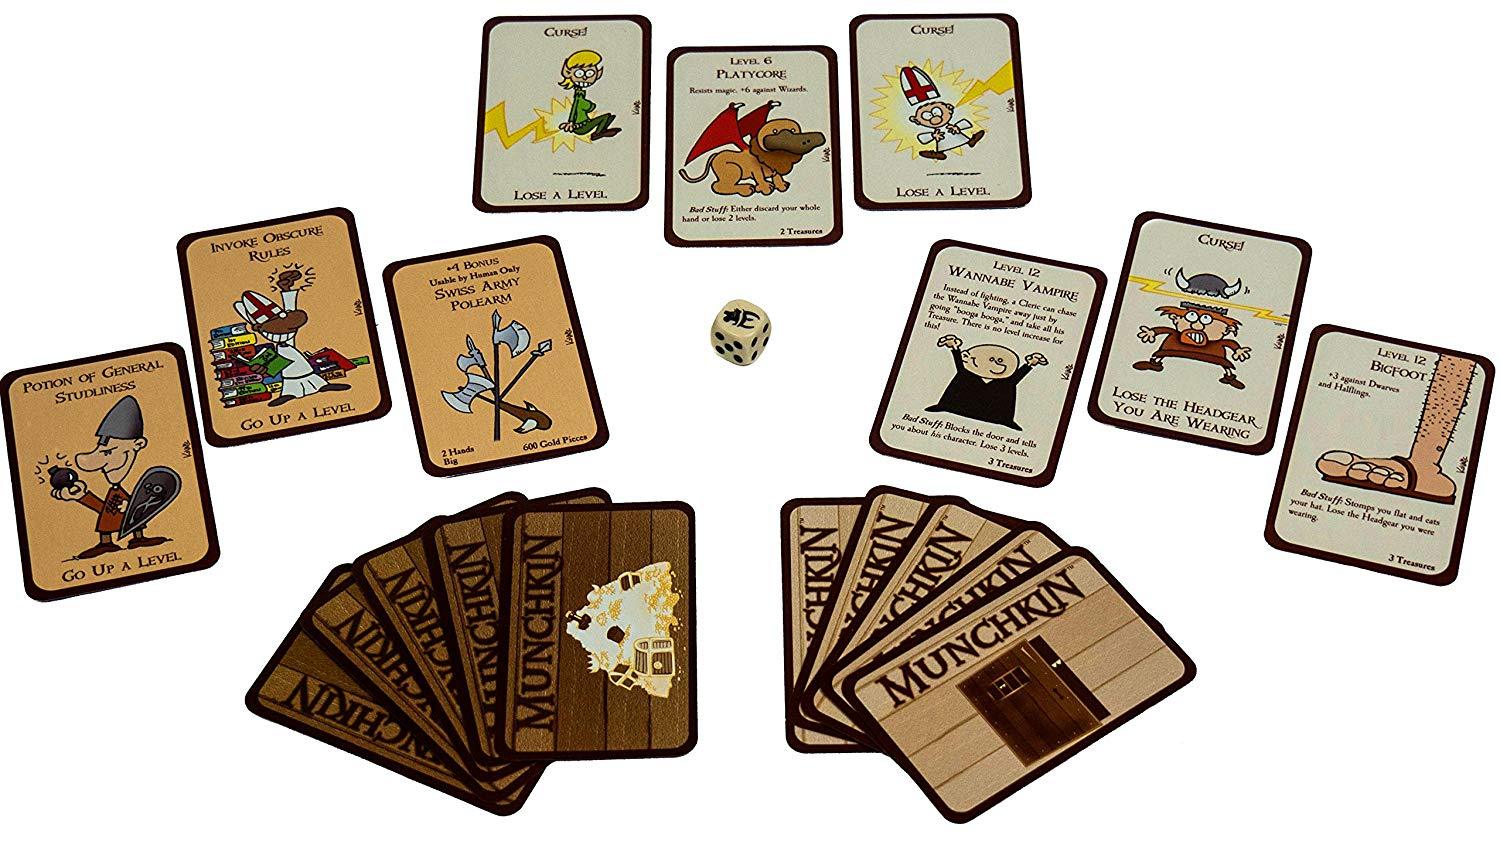 Munchkin Board Games Steve Jackson    | Red Claw Gaming